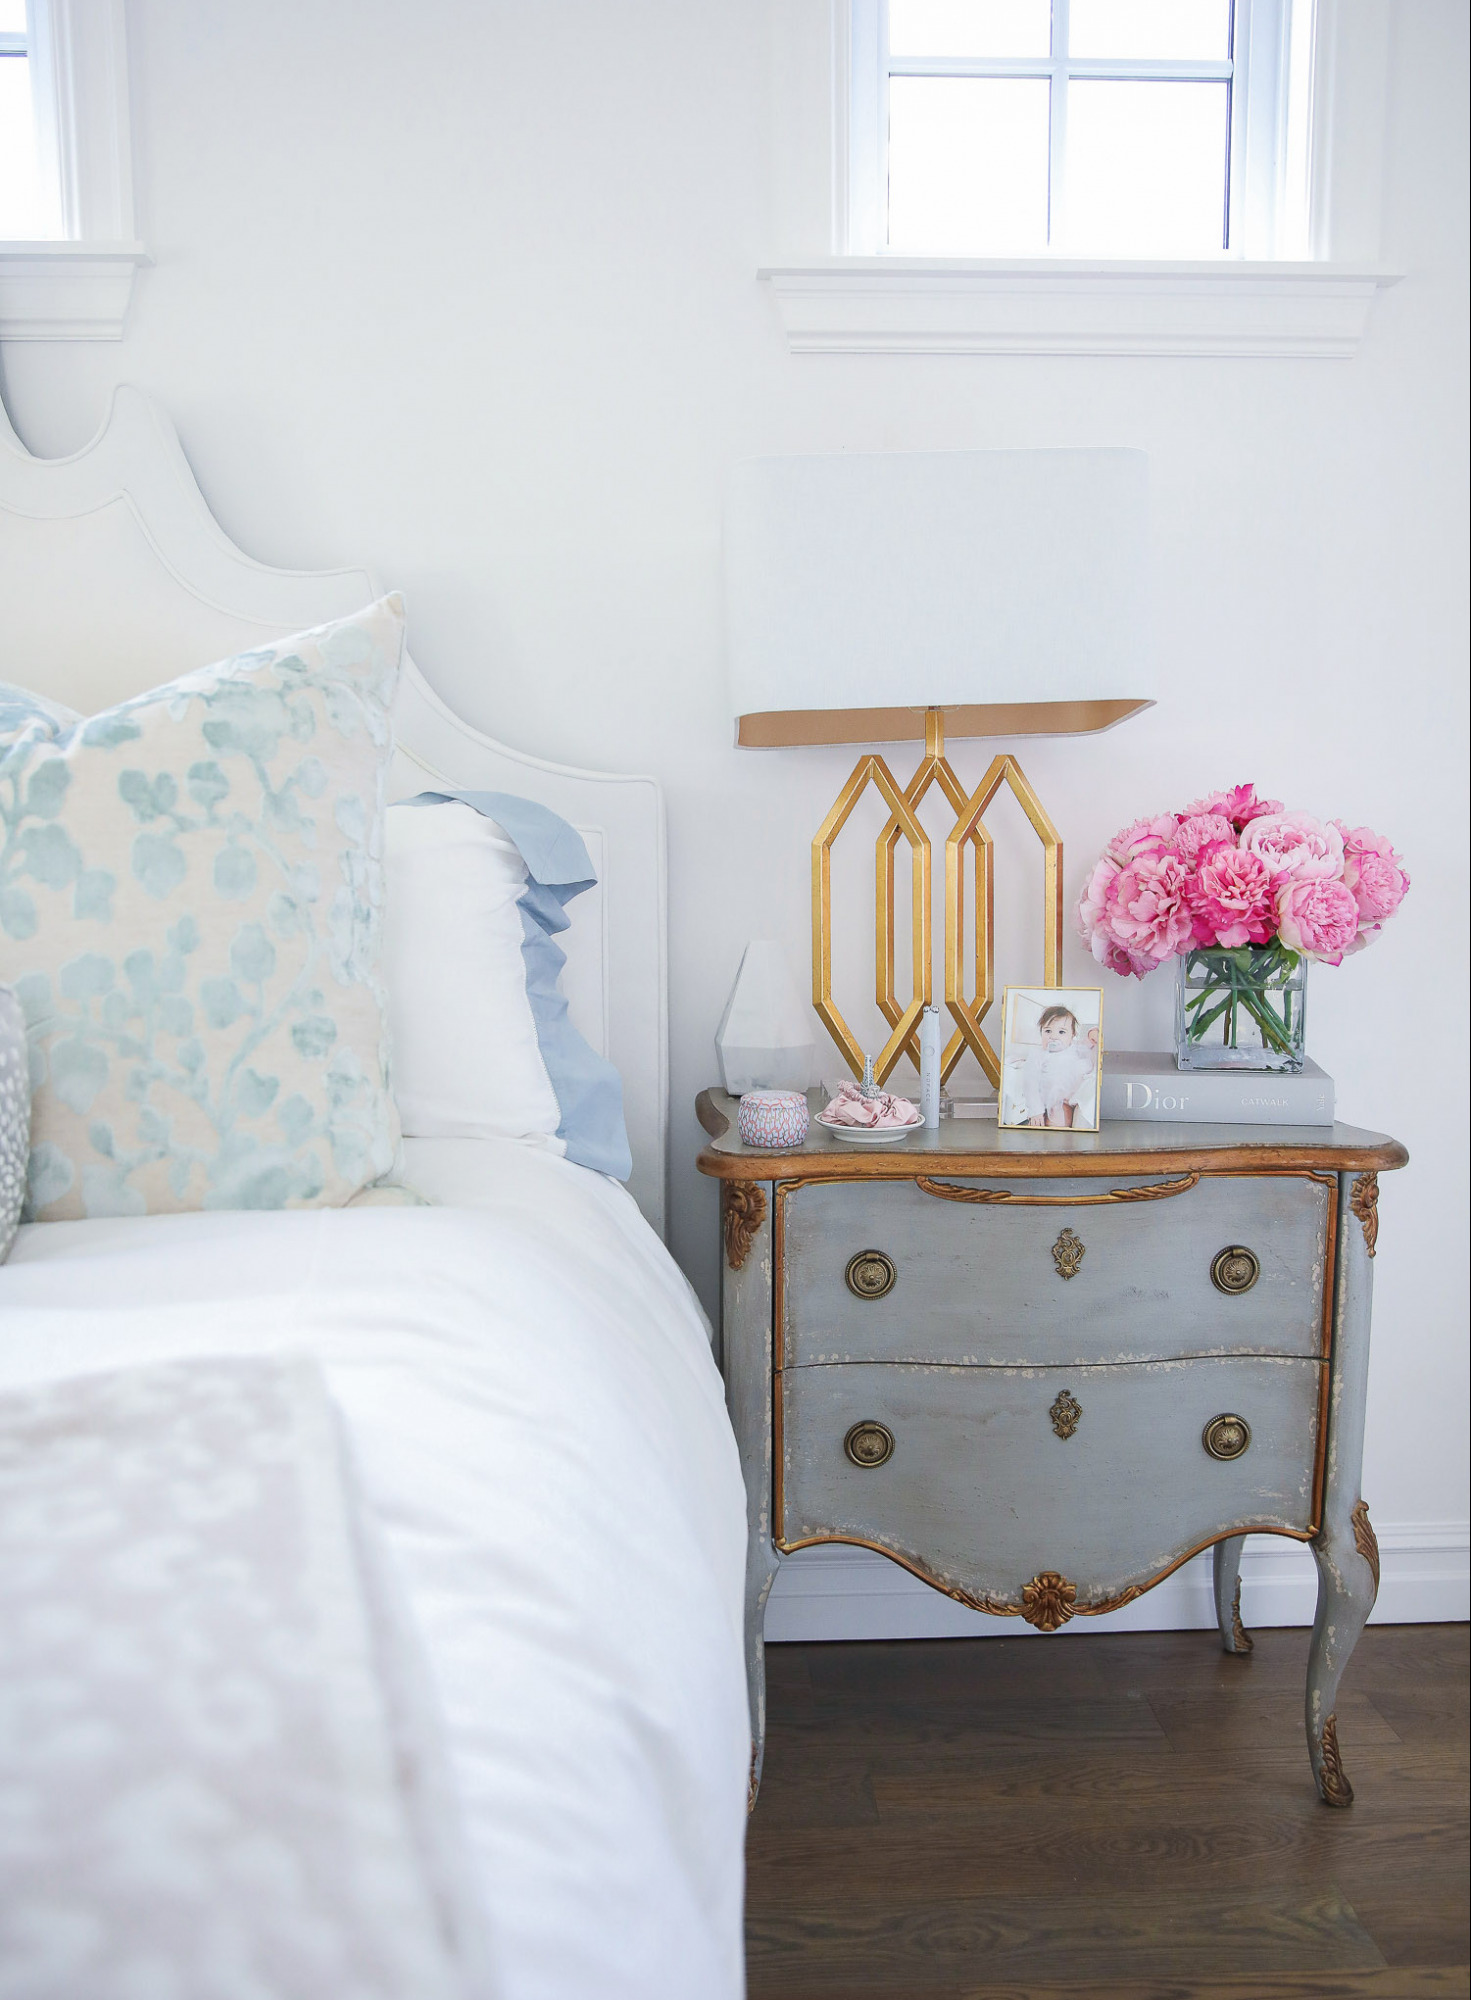 hooker furniture master bedroom, master bedroom Inspo interest, Emily Gemma master bedroom, Anthropologie mirrors, perfume trays, Pinterest home Inspo 2021 |  Nordstrom Anniversary Sale 2021 by popular US life and style blog, The Sweetest Thing: image of a master bedroom with a mirrored night stand containing a gold base lamp, glass vase filled with pink peonies, Voulspa candle, and pink silk scrunchies on a white ceramic ring holder. 